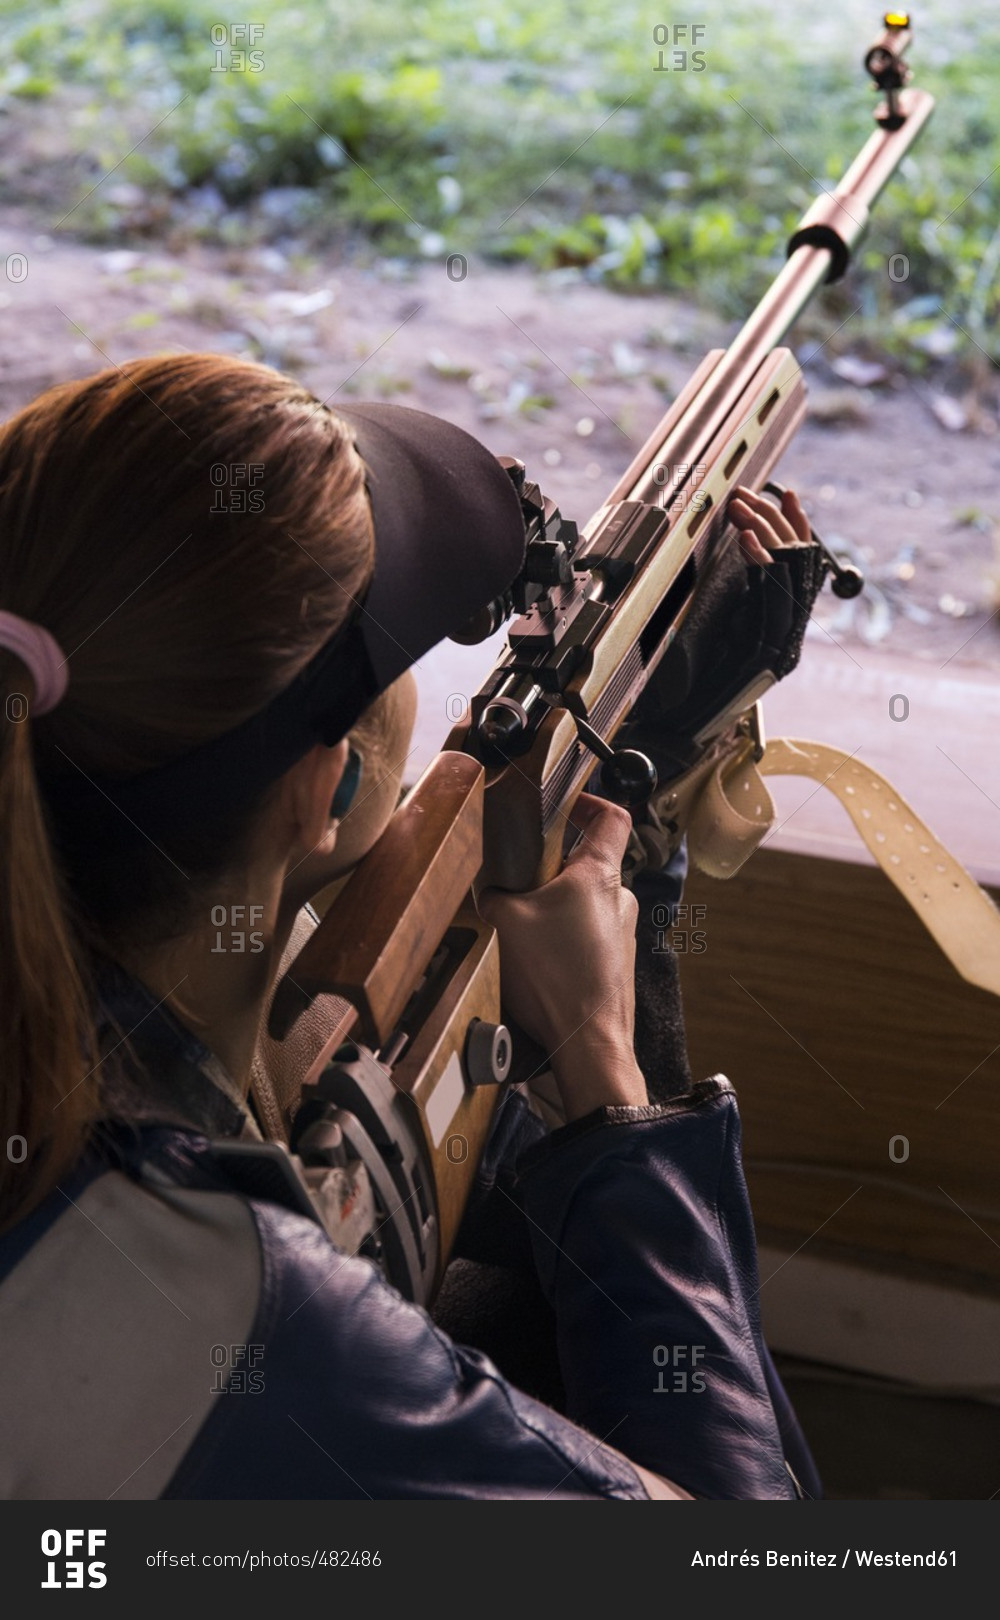 Woman with a sporting rifle aiming in a shooting range